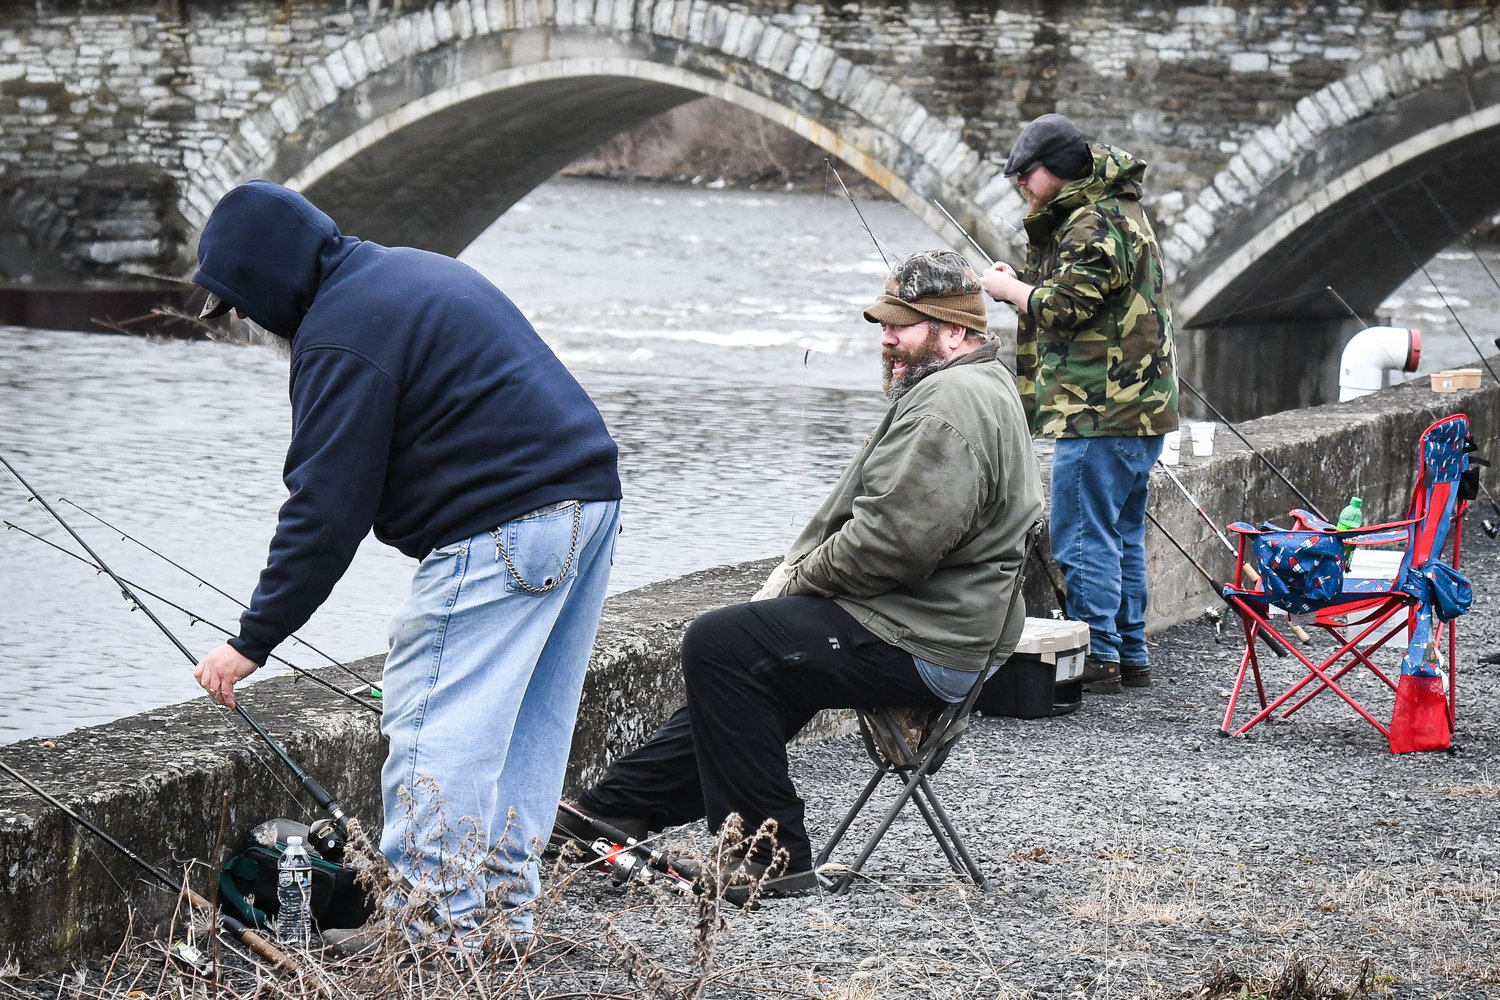 Anglers go fishing near the Newport Stone Arch Bridge during opening day for trout season on Friday morning.